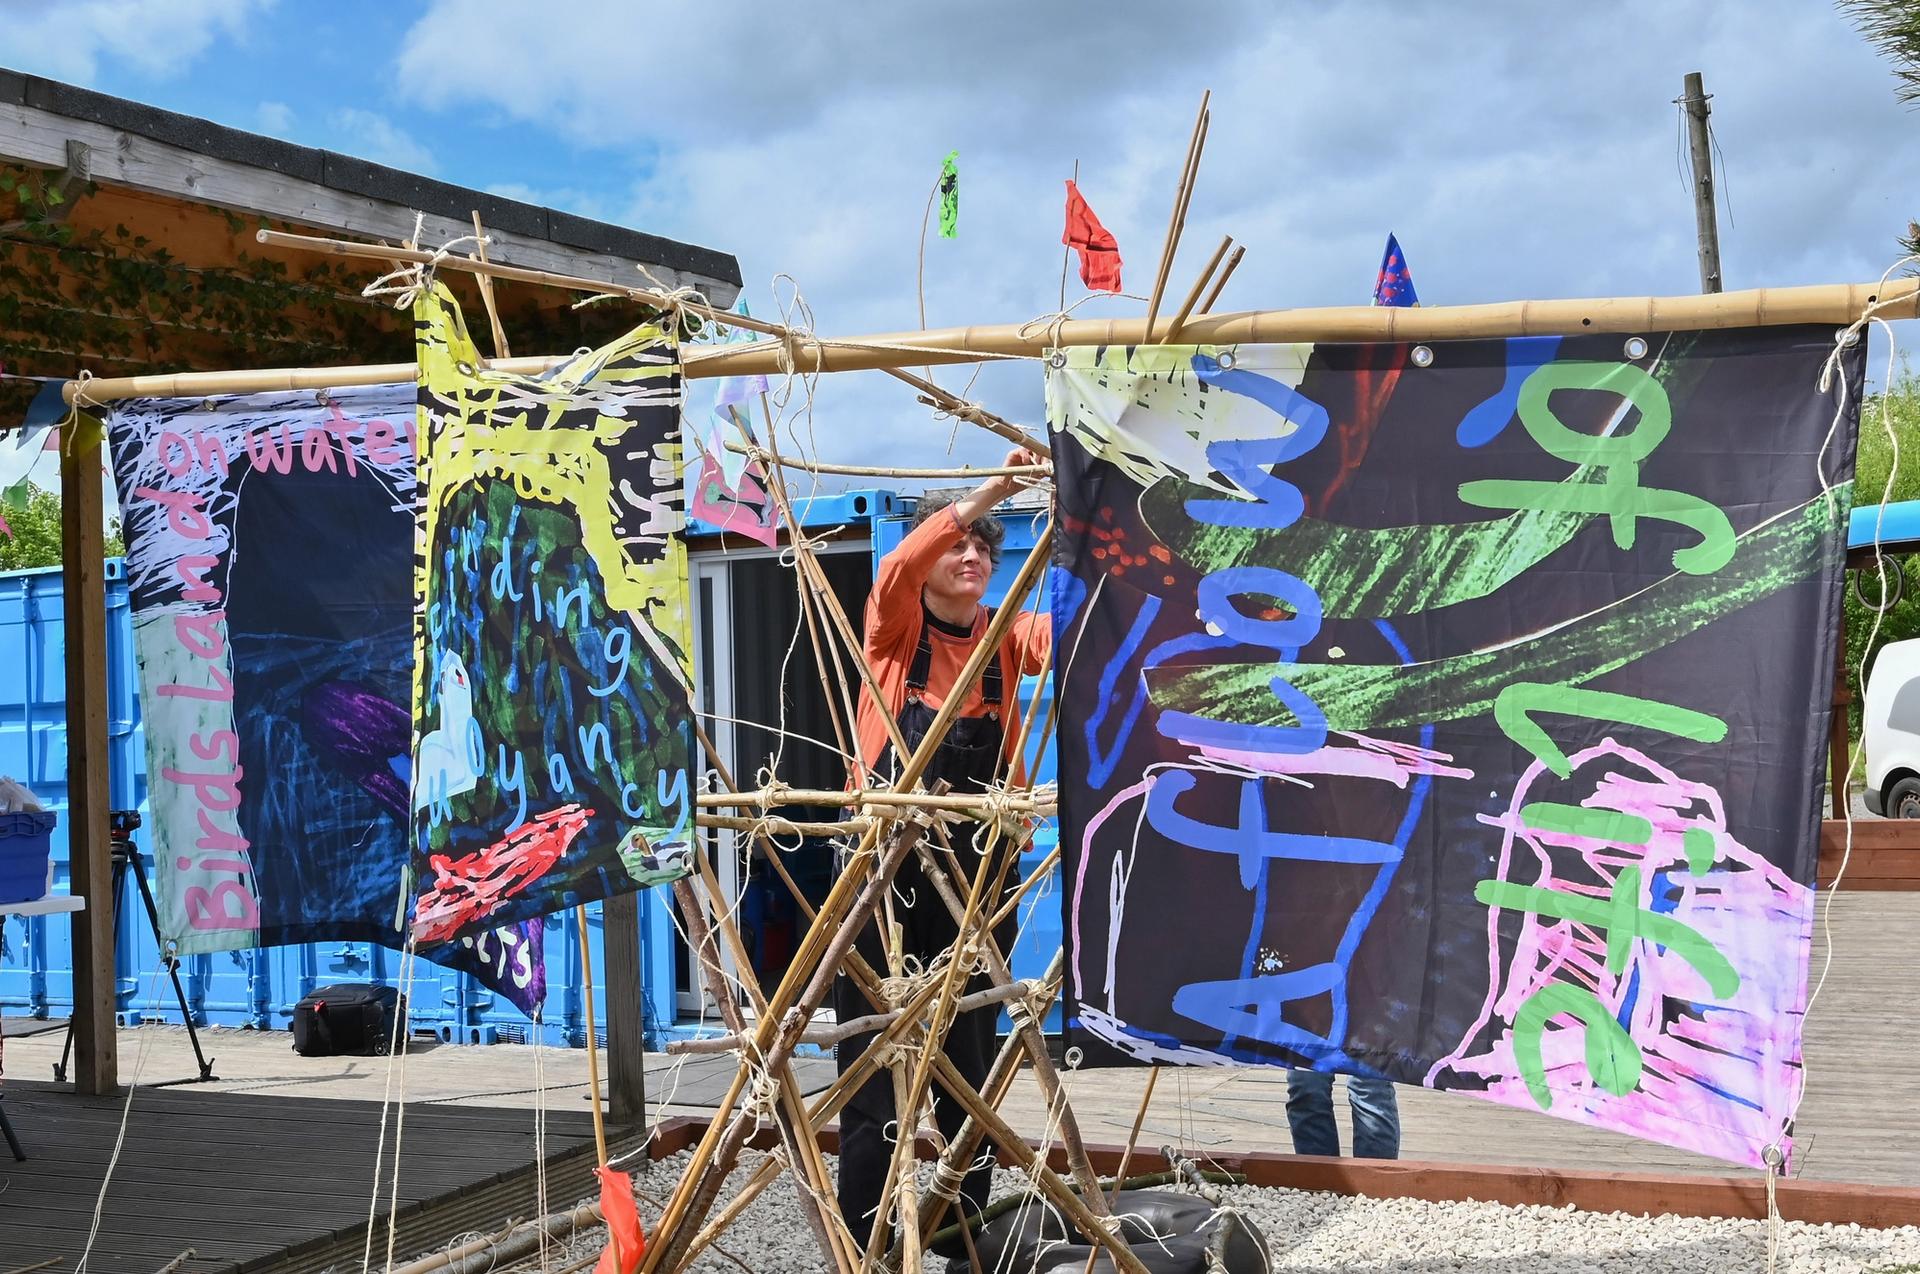 The artist Sarah Kenchington hanging sails by Peter and Rossi at Bridge 8 Hub, during Canal Connections, part of Edinburgh Art Festival 2022 Photo: Julie Howden